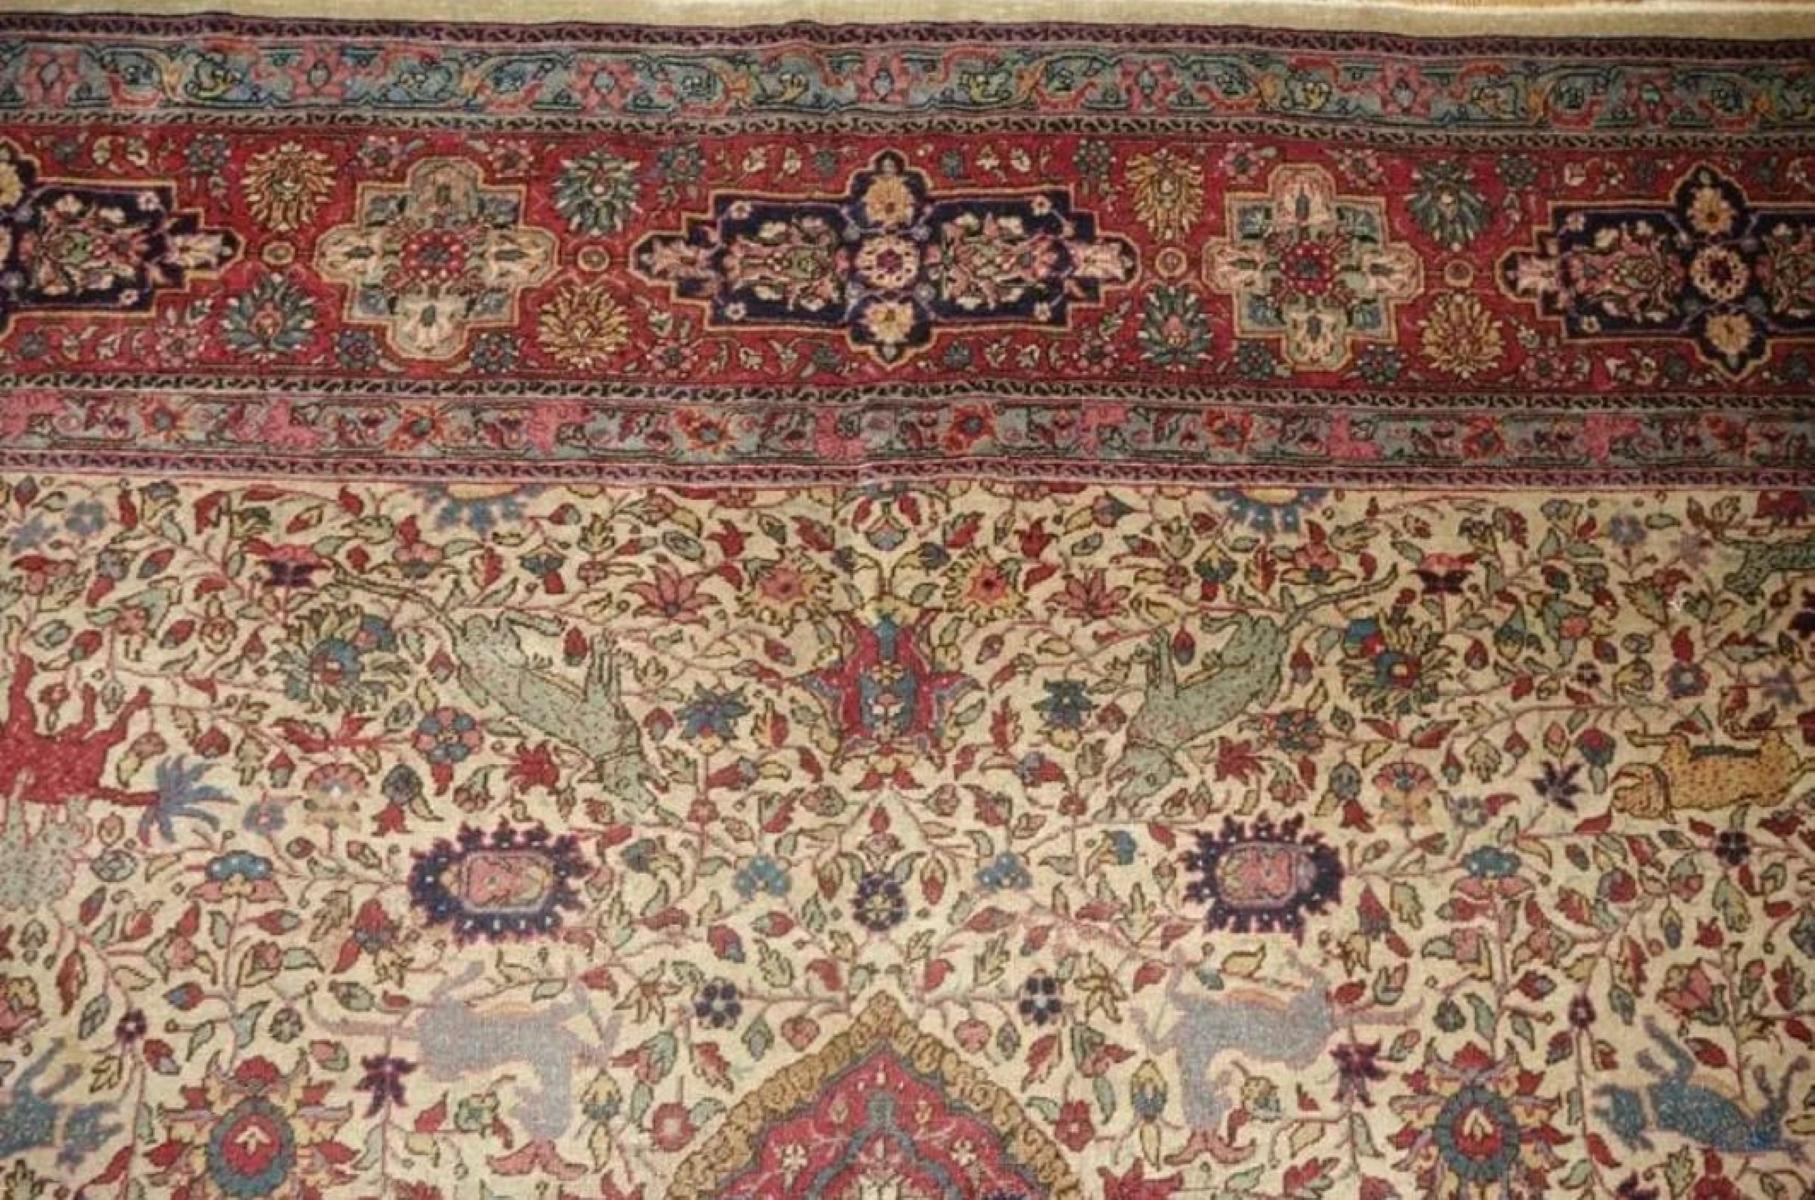 Very fine Persian Tabriz Rug - 9' x 12' In Excellent Condition For Sale In Newmanstown, PA